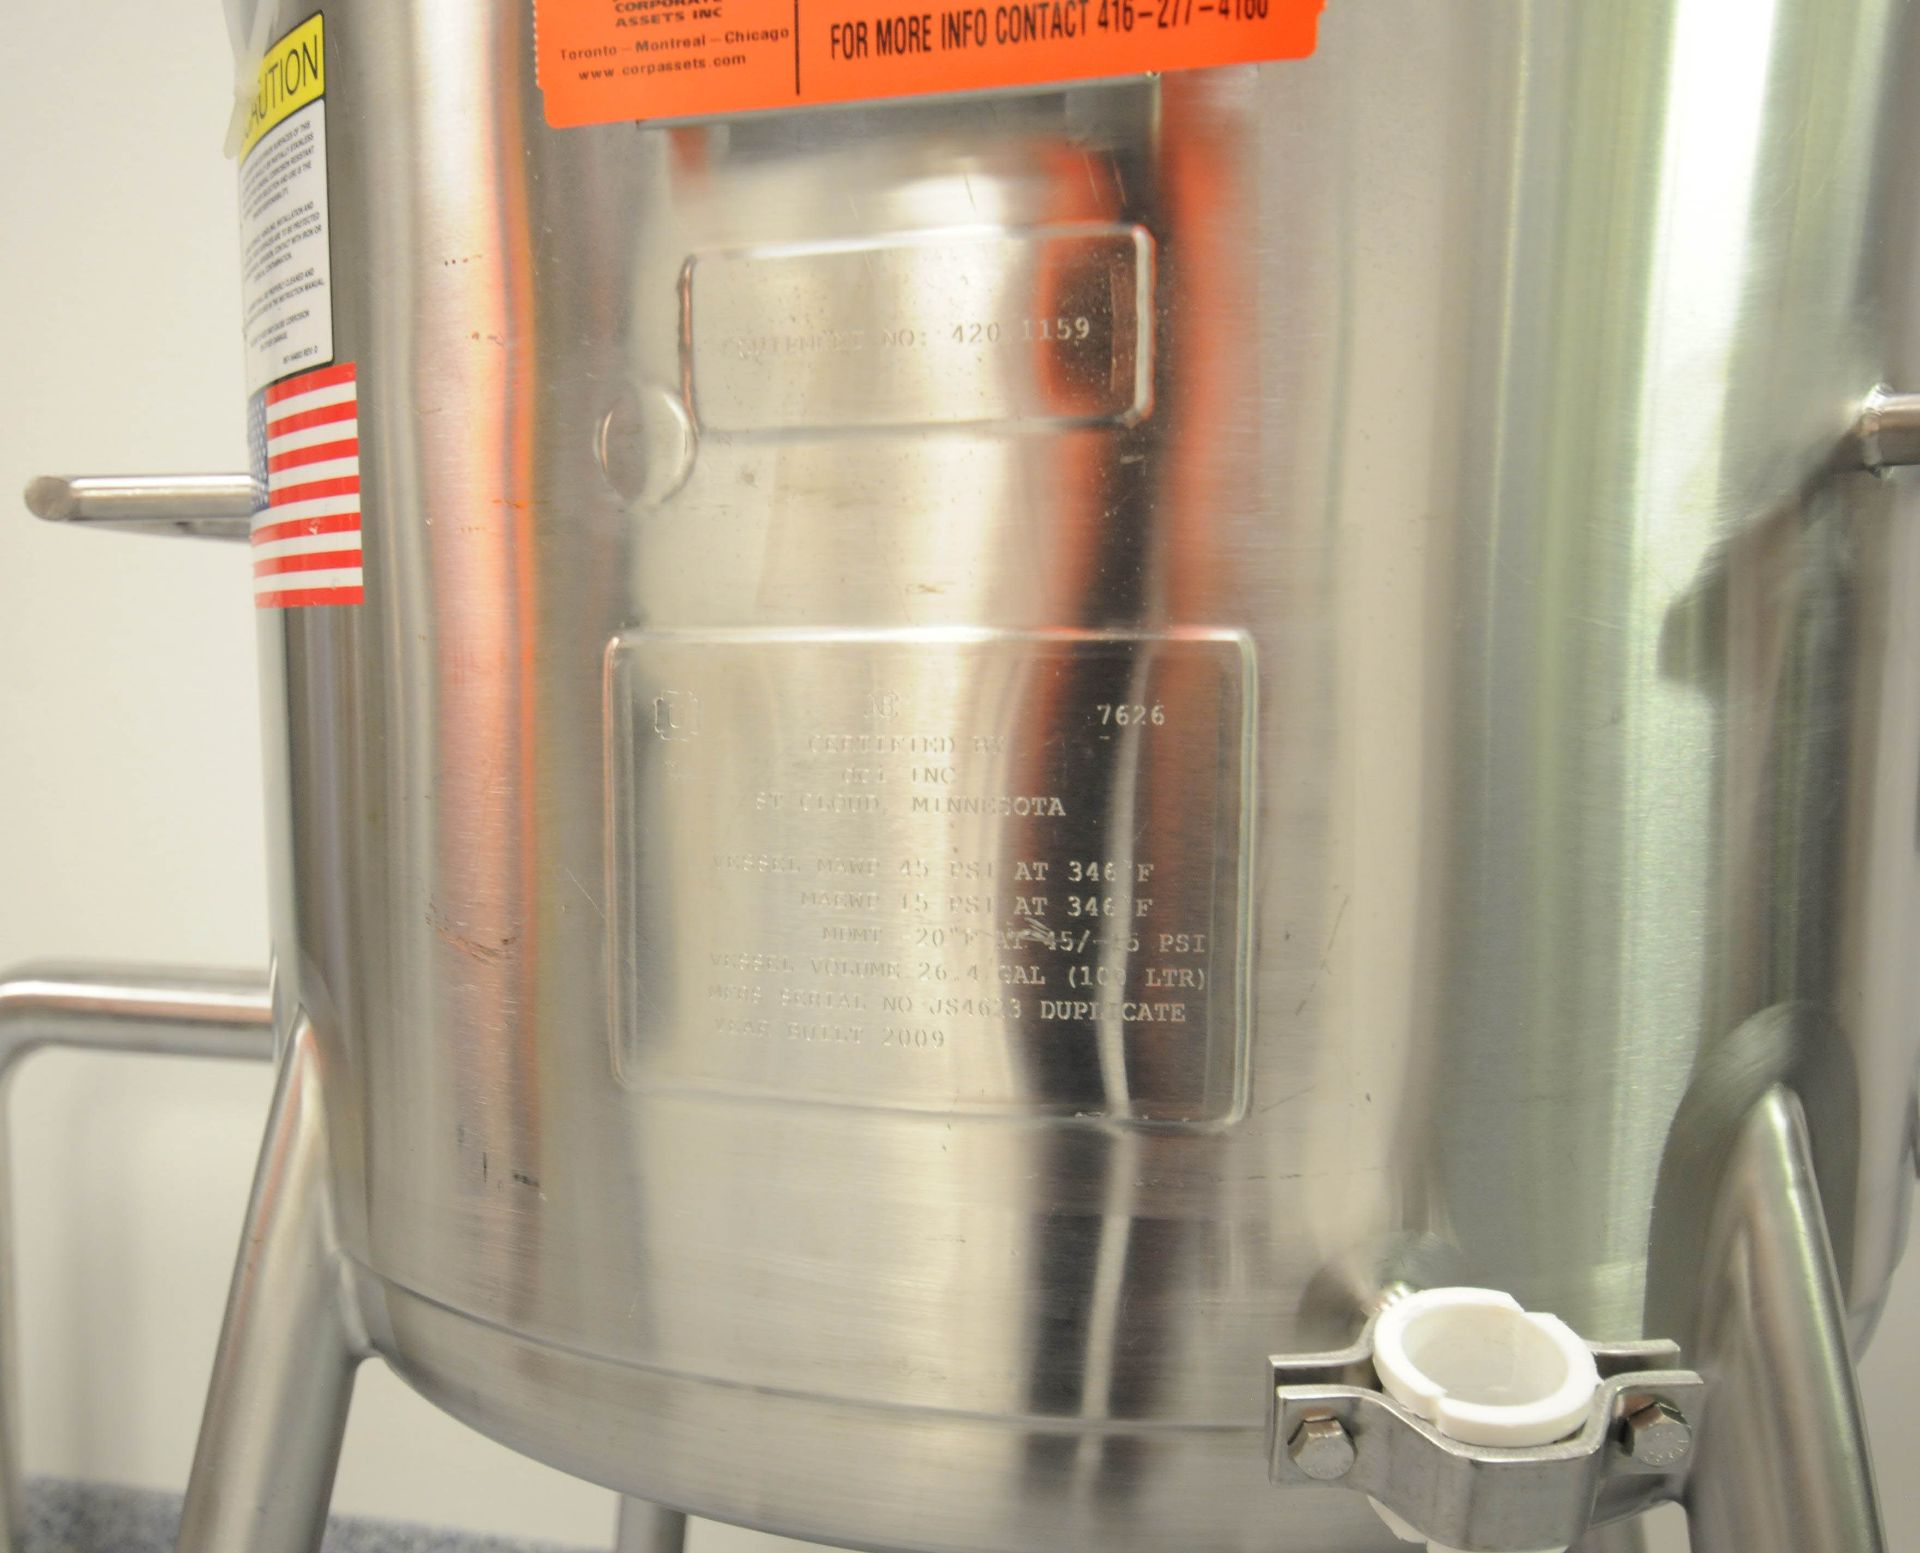 DCI (2009) PORTABLE STAINLESS STEEL TANK WITH 100 LITER CAPACITY, 45 PSIG MAWP @ 346 DEG F, 23" - Image 2 of 5